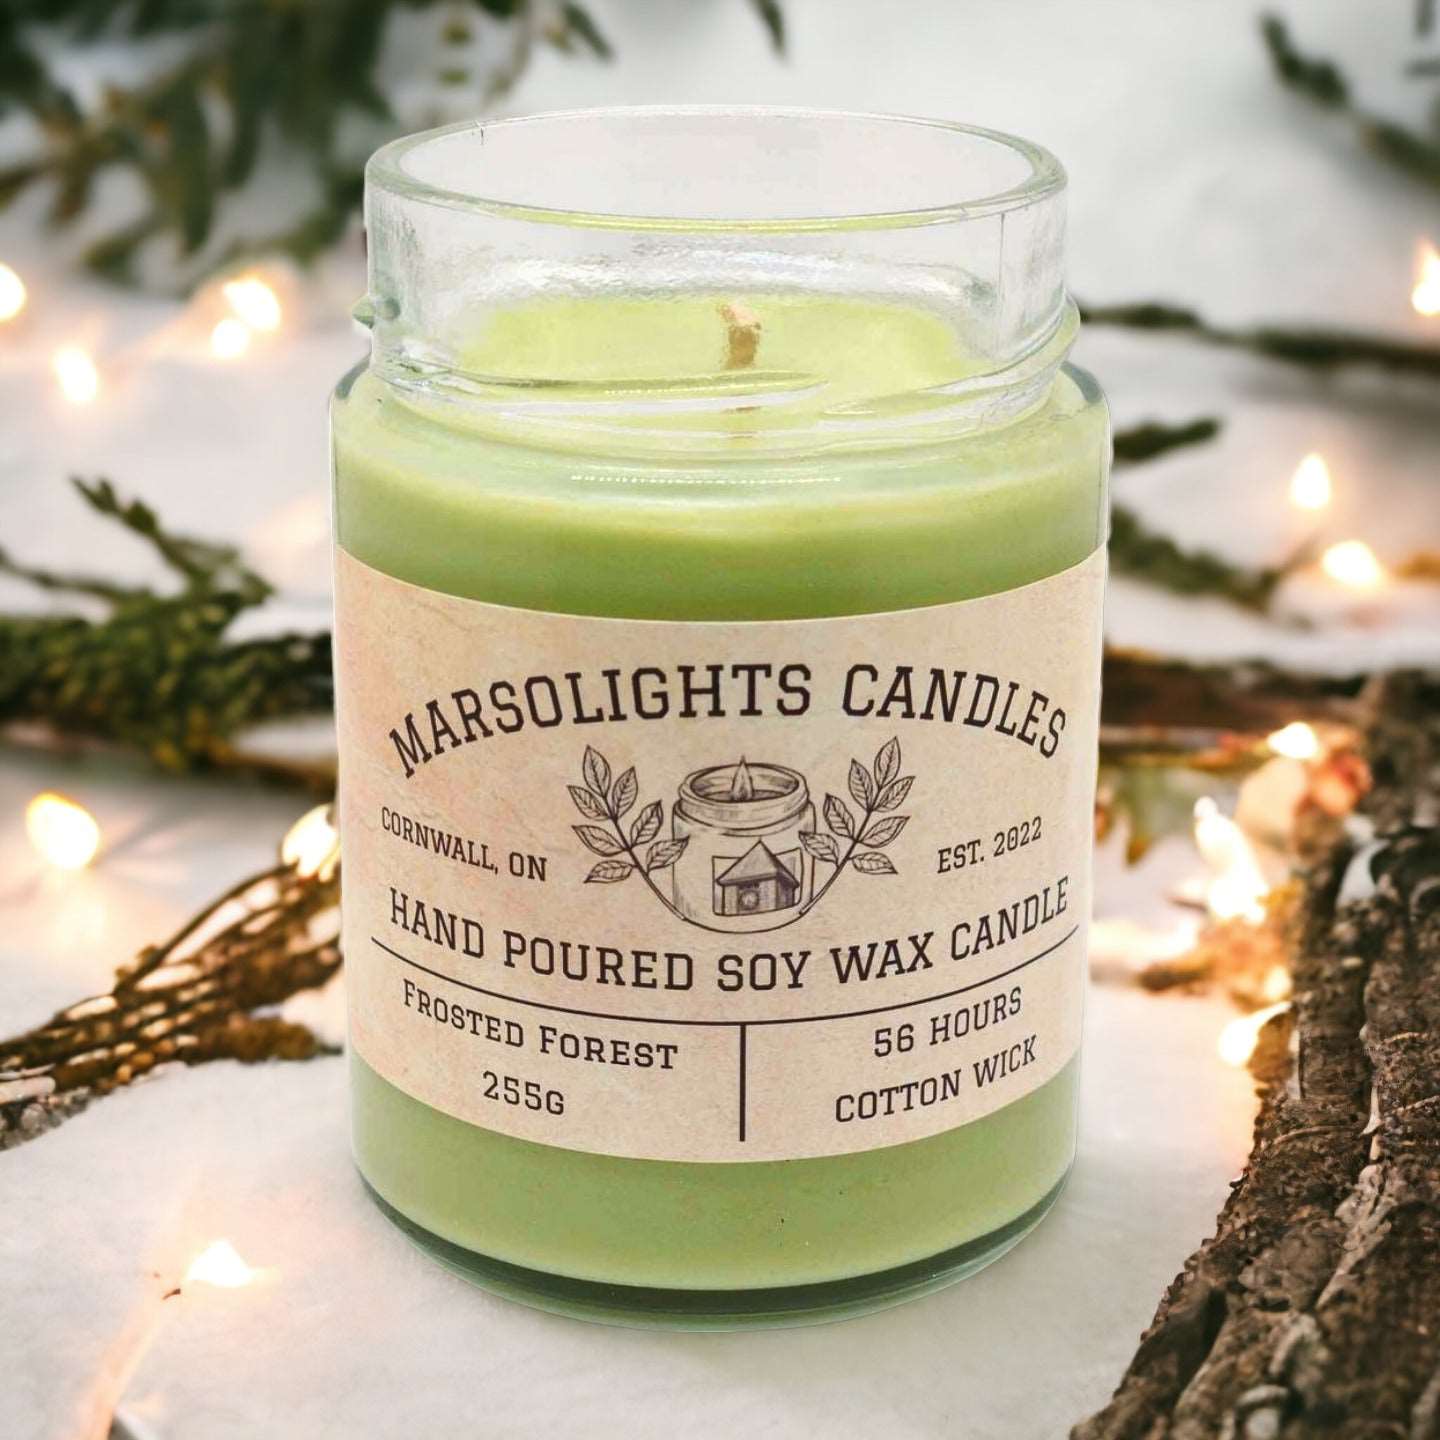  Kaileycandles  Frostest Forest - Organic Scented